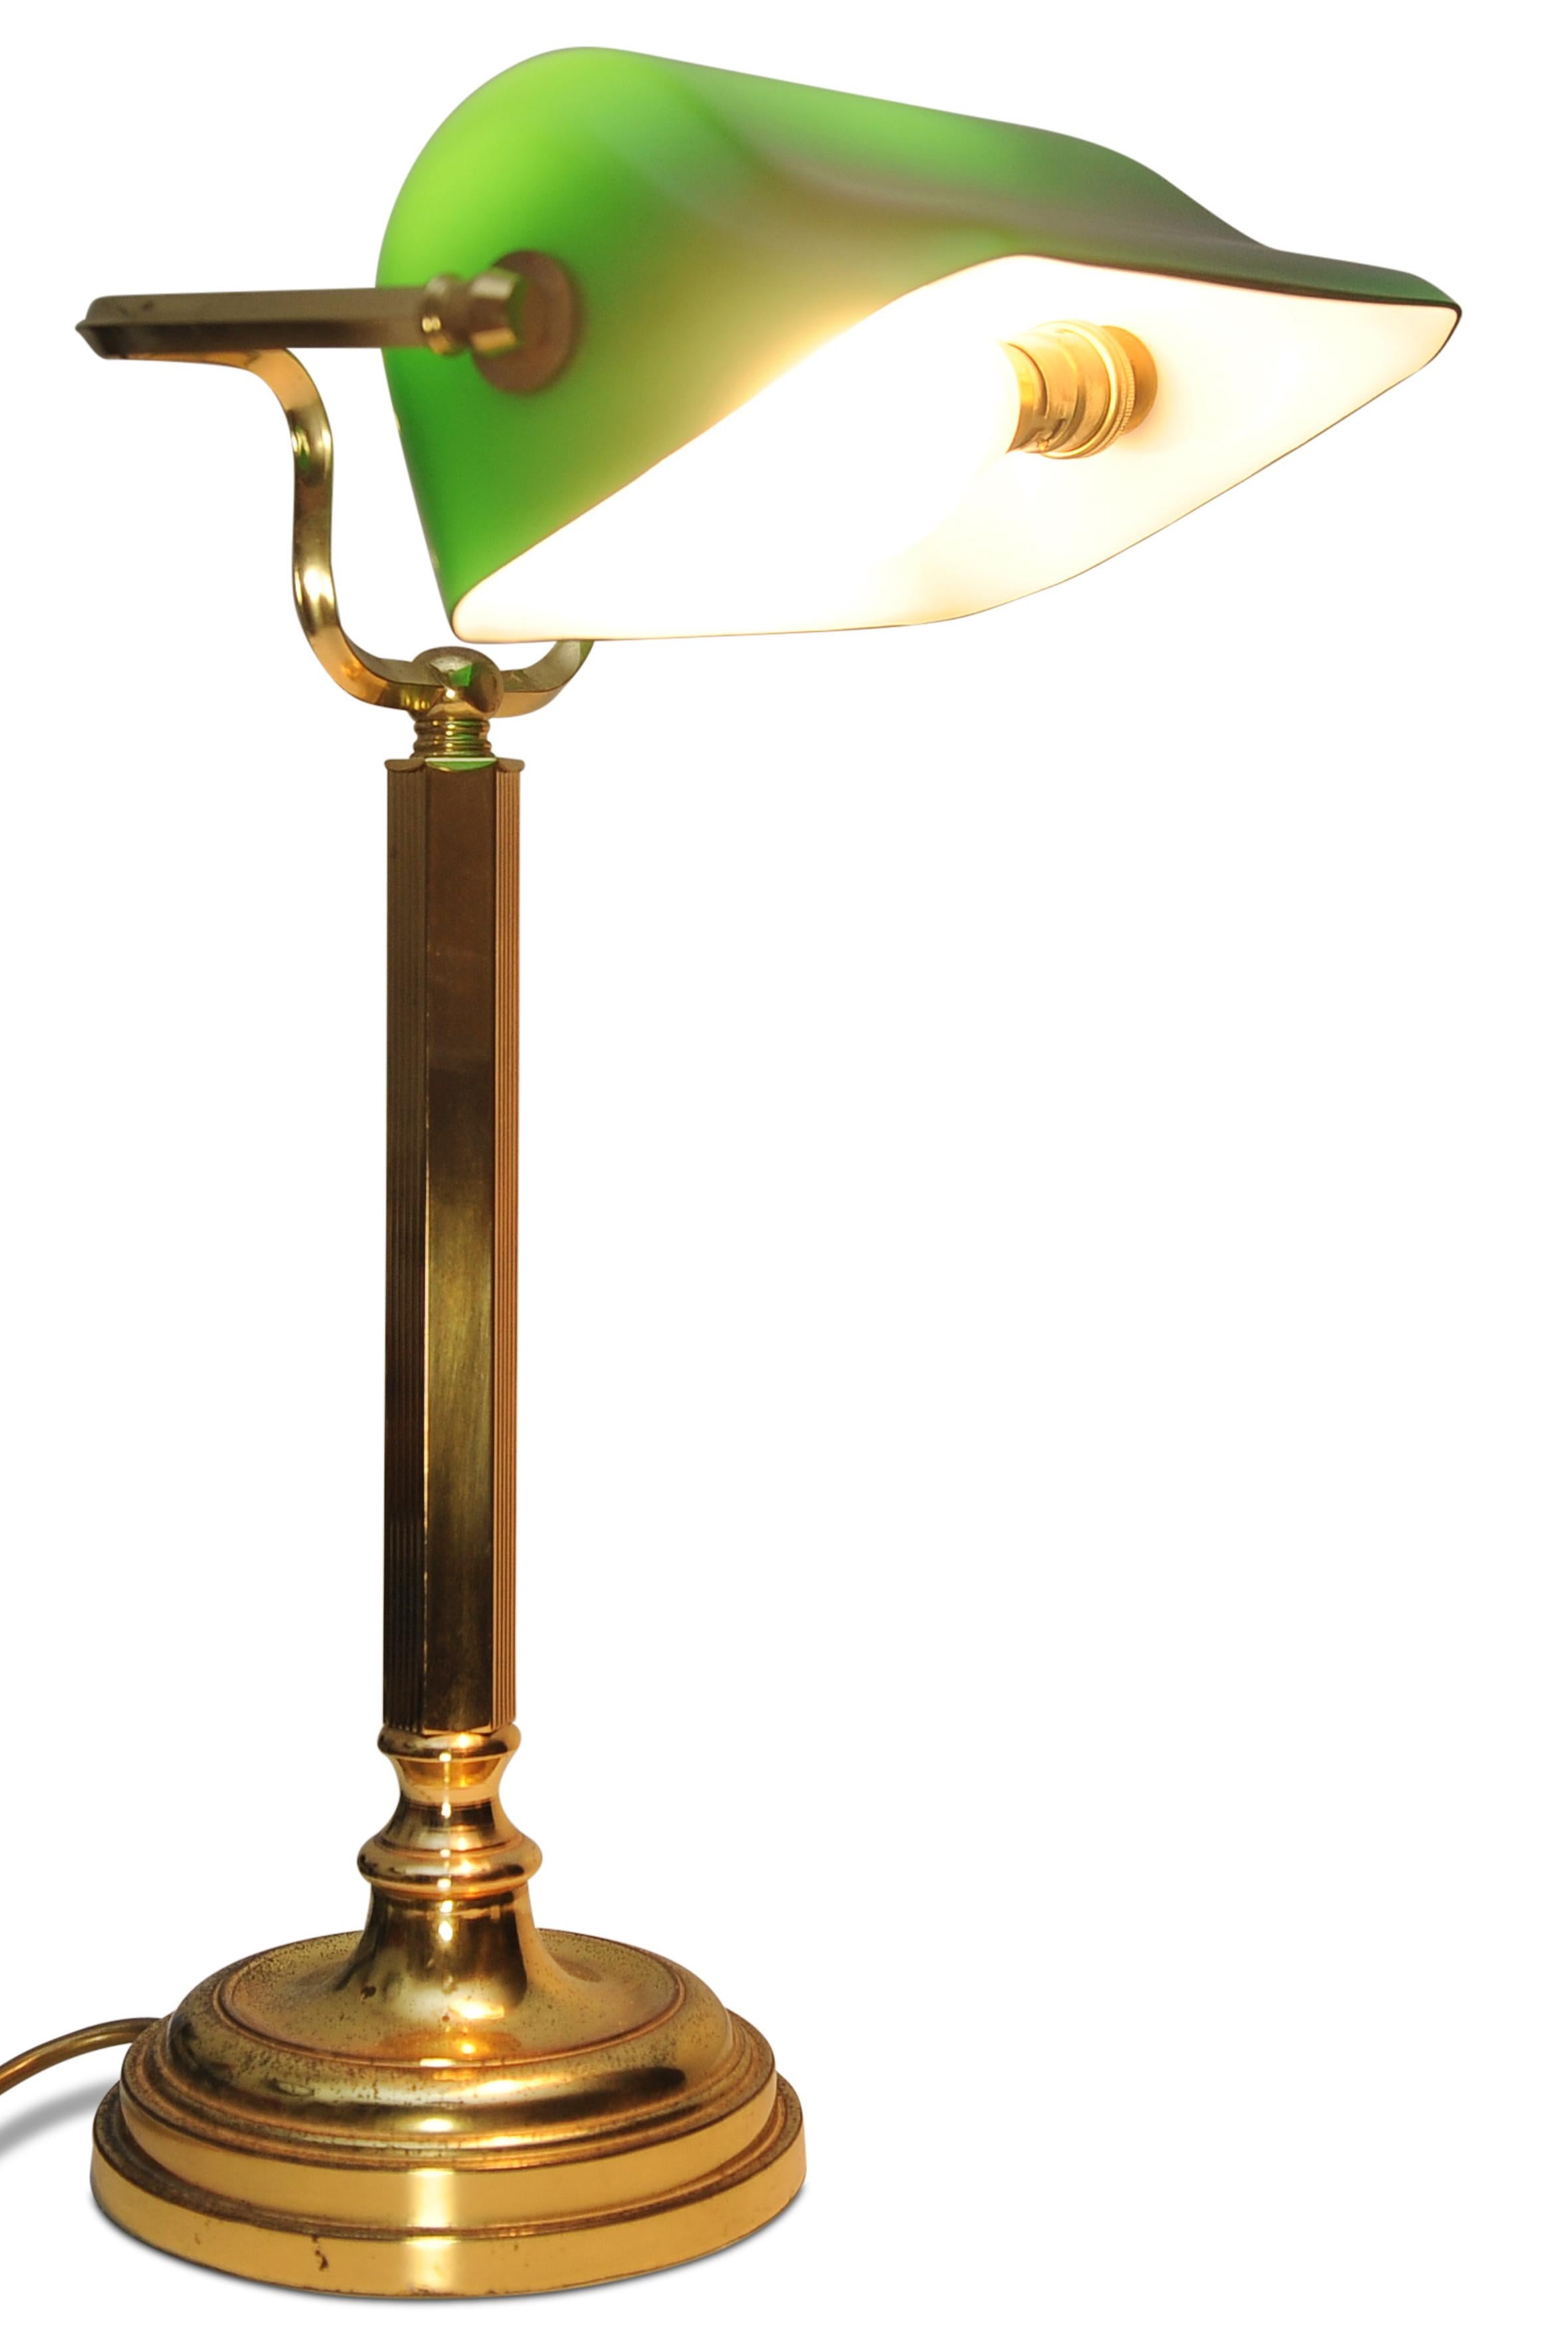 Antique Racing Green Brass Bankers Lamp With Adjustable Green Glazed Shade  In Good Condition For Sale In High Wycombe, GB